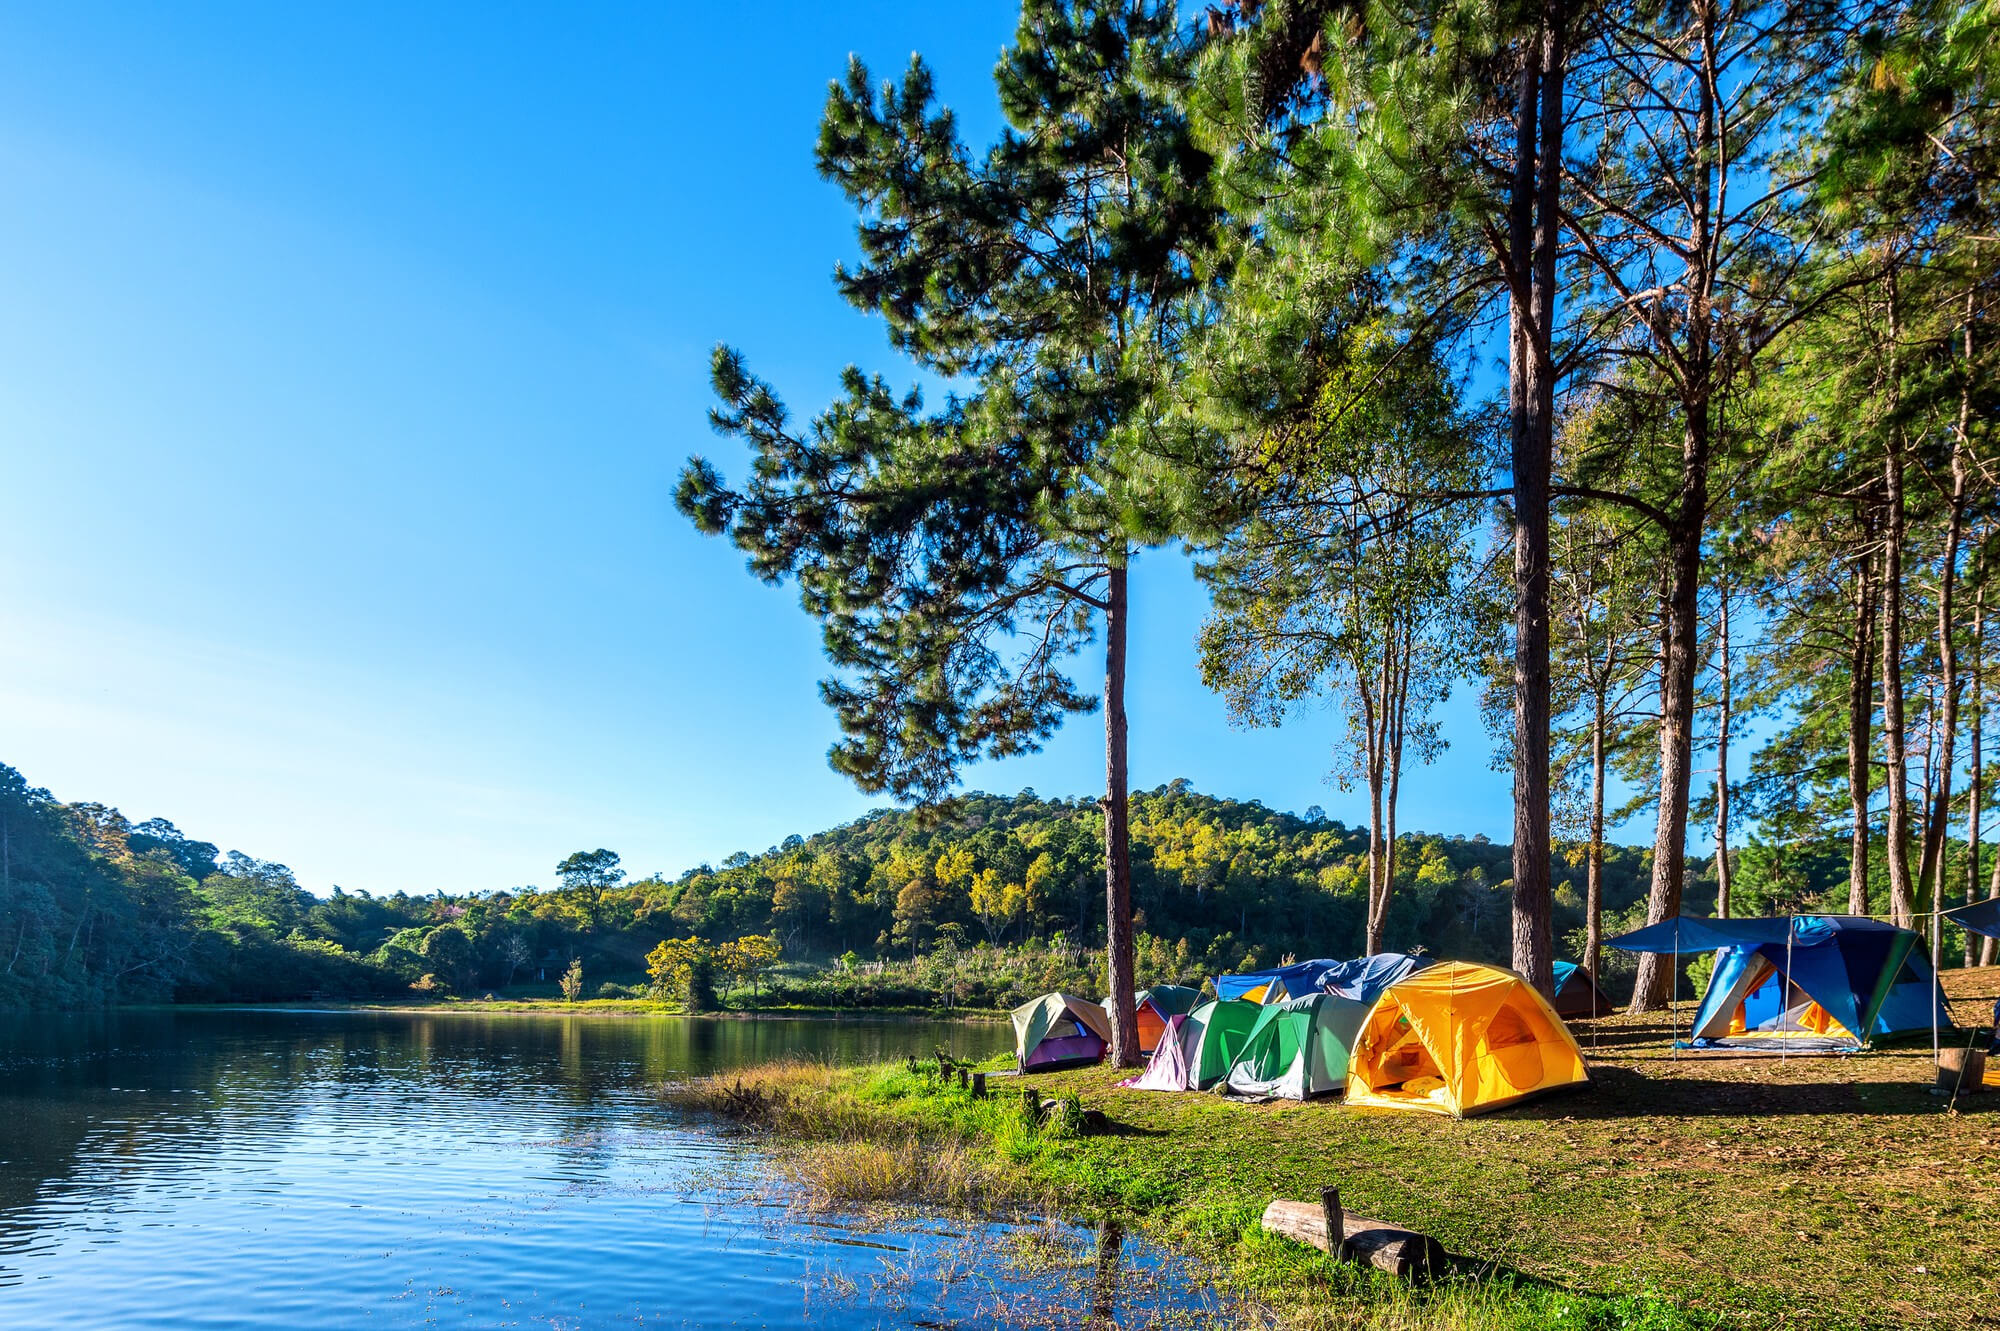 Lake byllesby camping